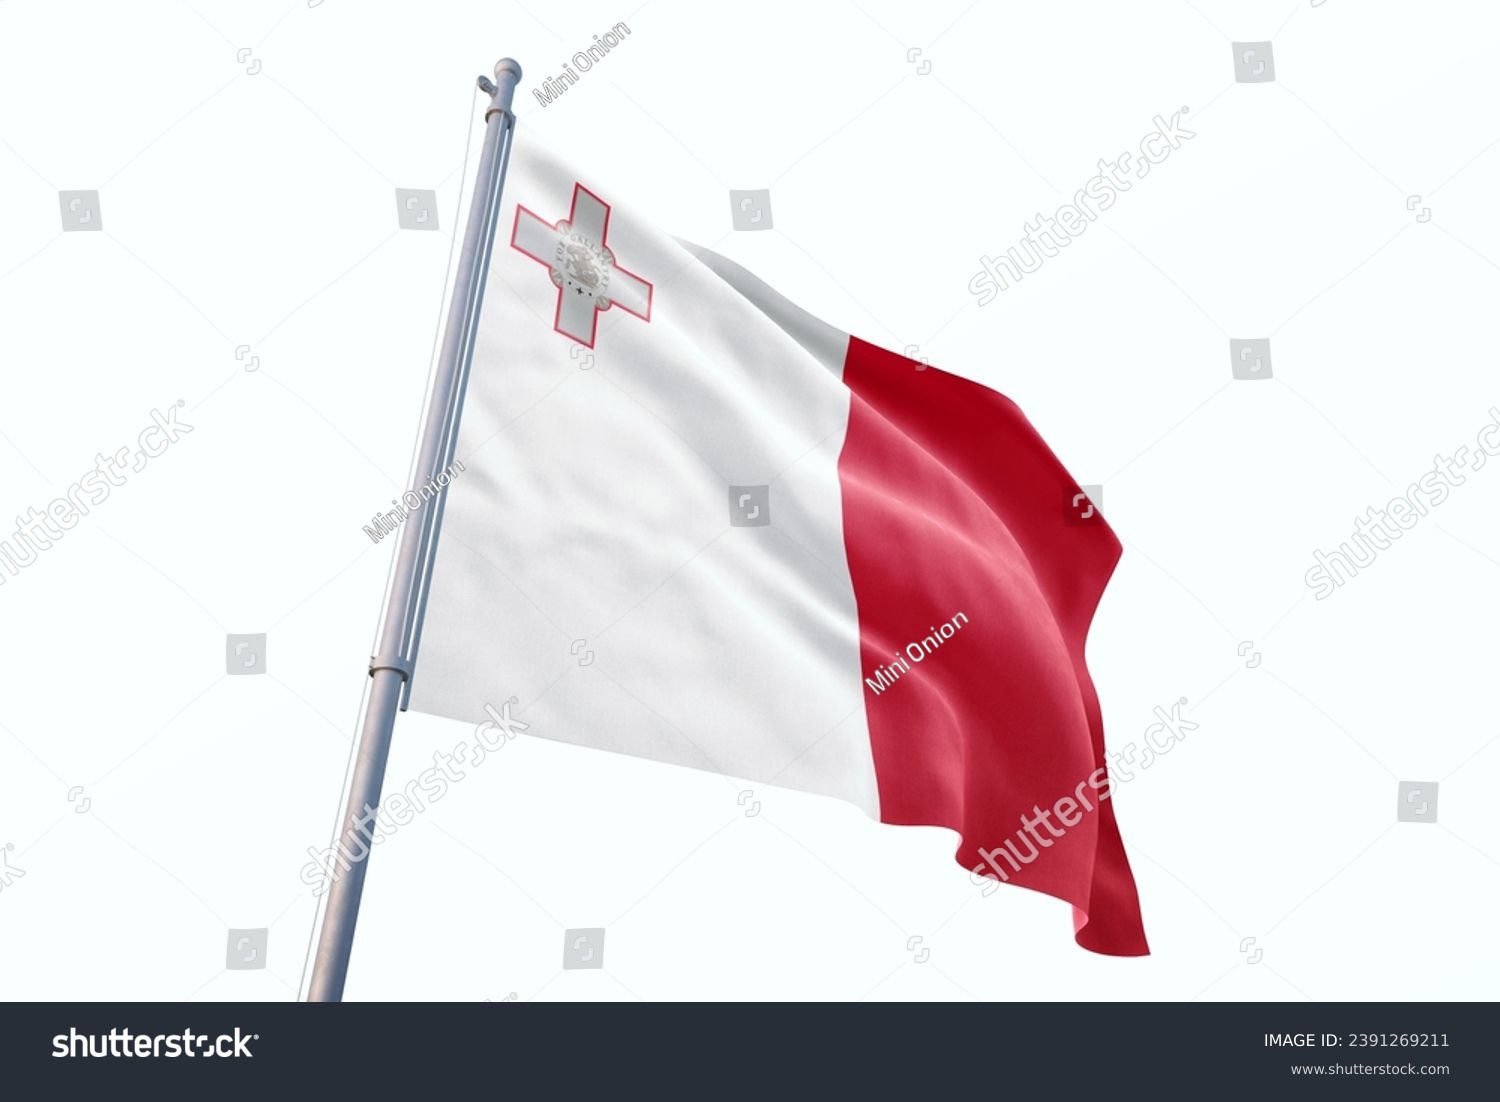 Waving flag of Malta in white background. Malta flag for independence day. The symbol of the state on wavy fabric. #2391269211